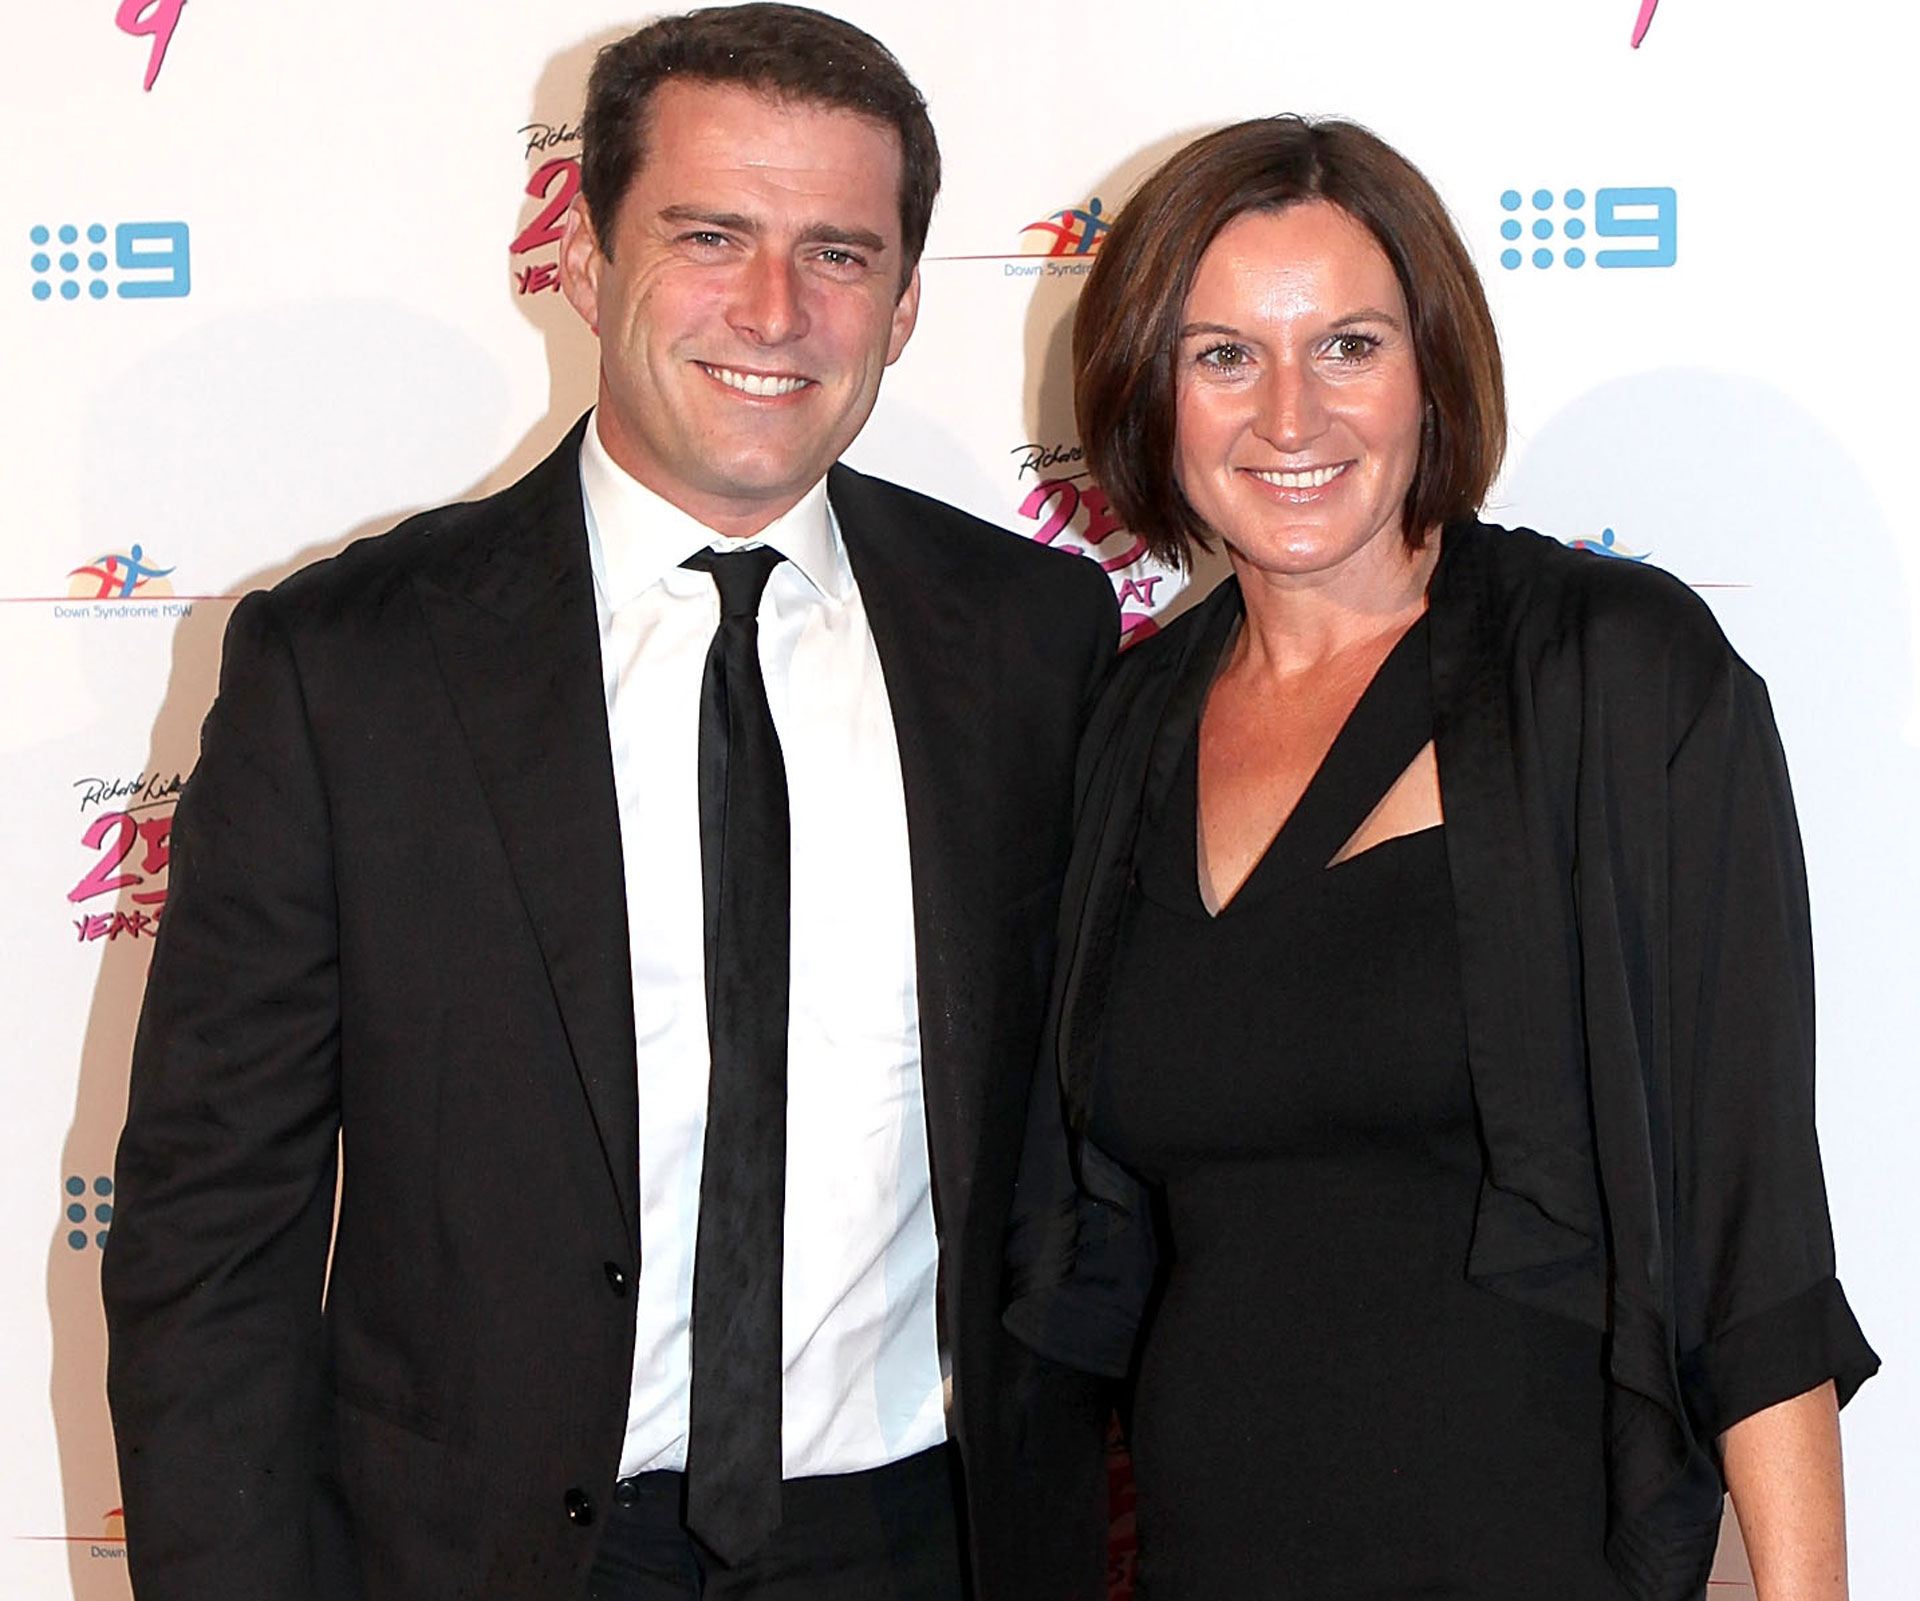 Karl Stefanovic a no-show on morning TV